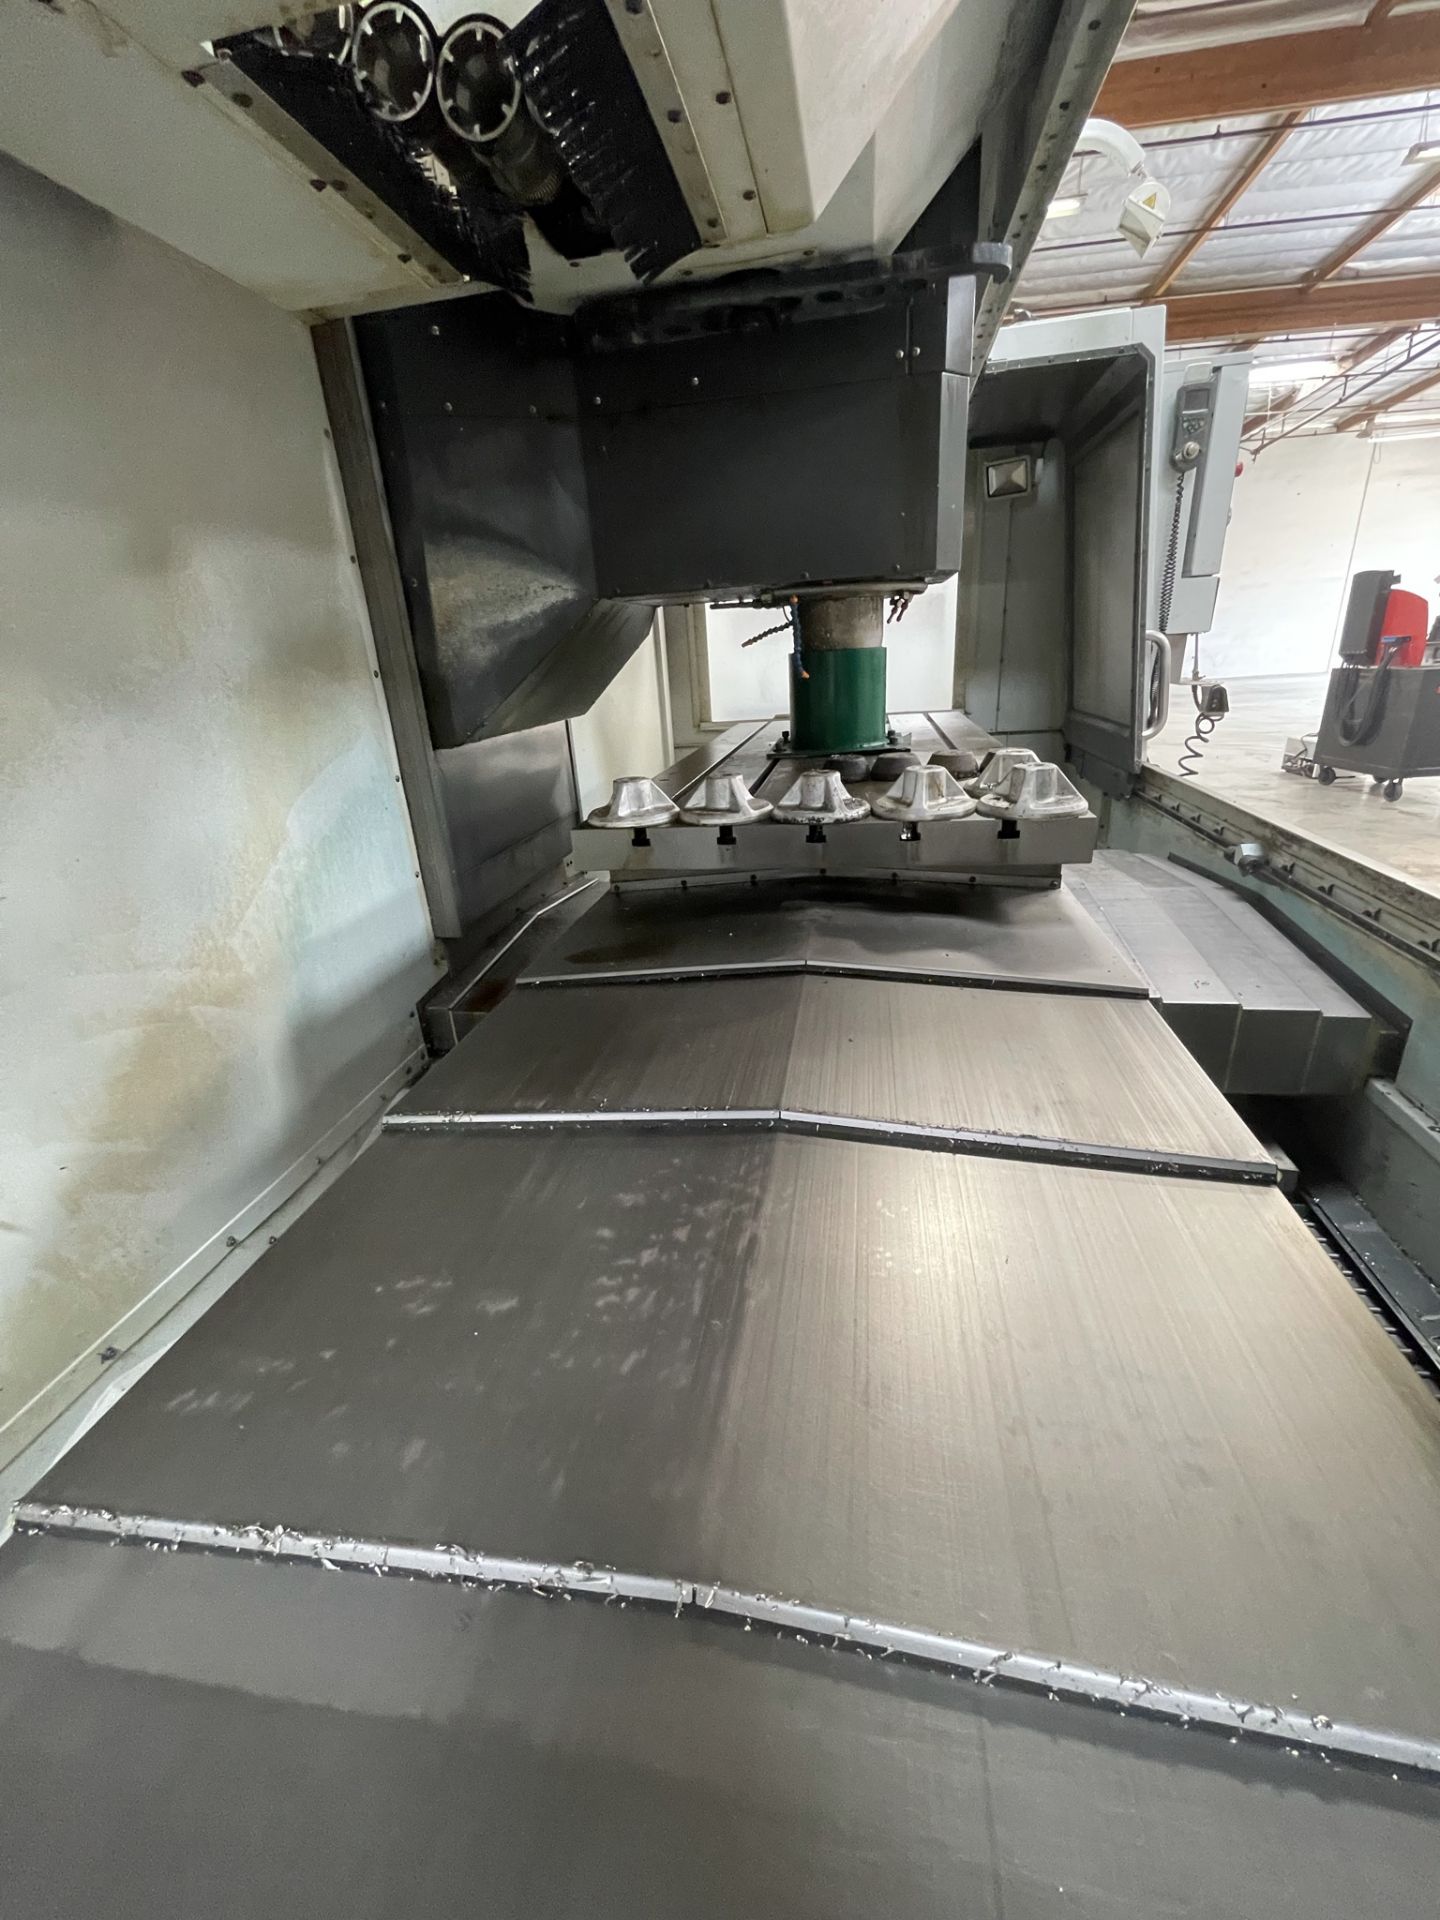 2014 HAAS VF-6/50 VERTICAL MACHINING CENTER, XYZ TRAVELS: 64" X 32" X 30", 84" X 36" TABLE, 7500 RPM - Image 10 of 24